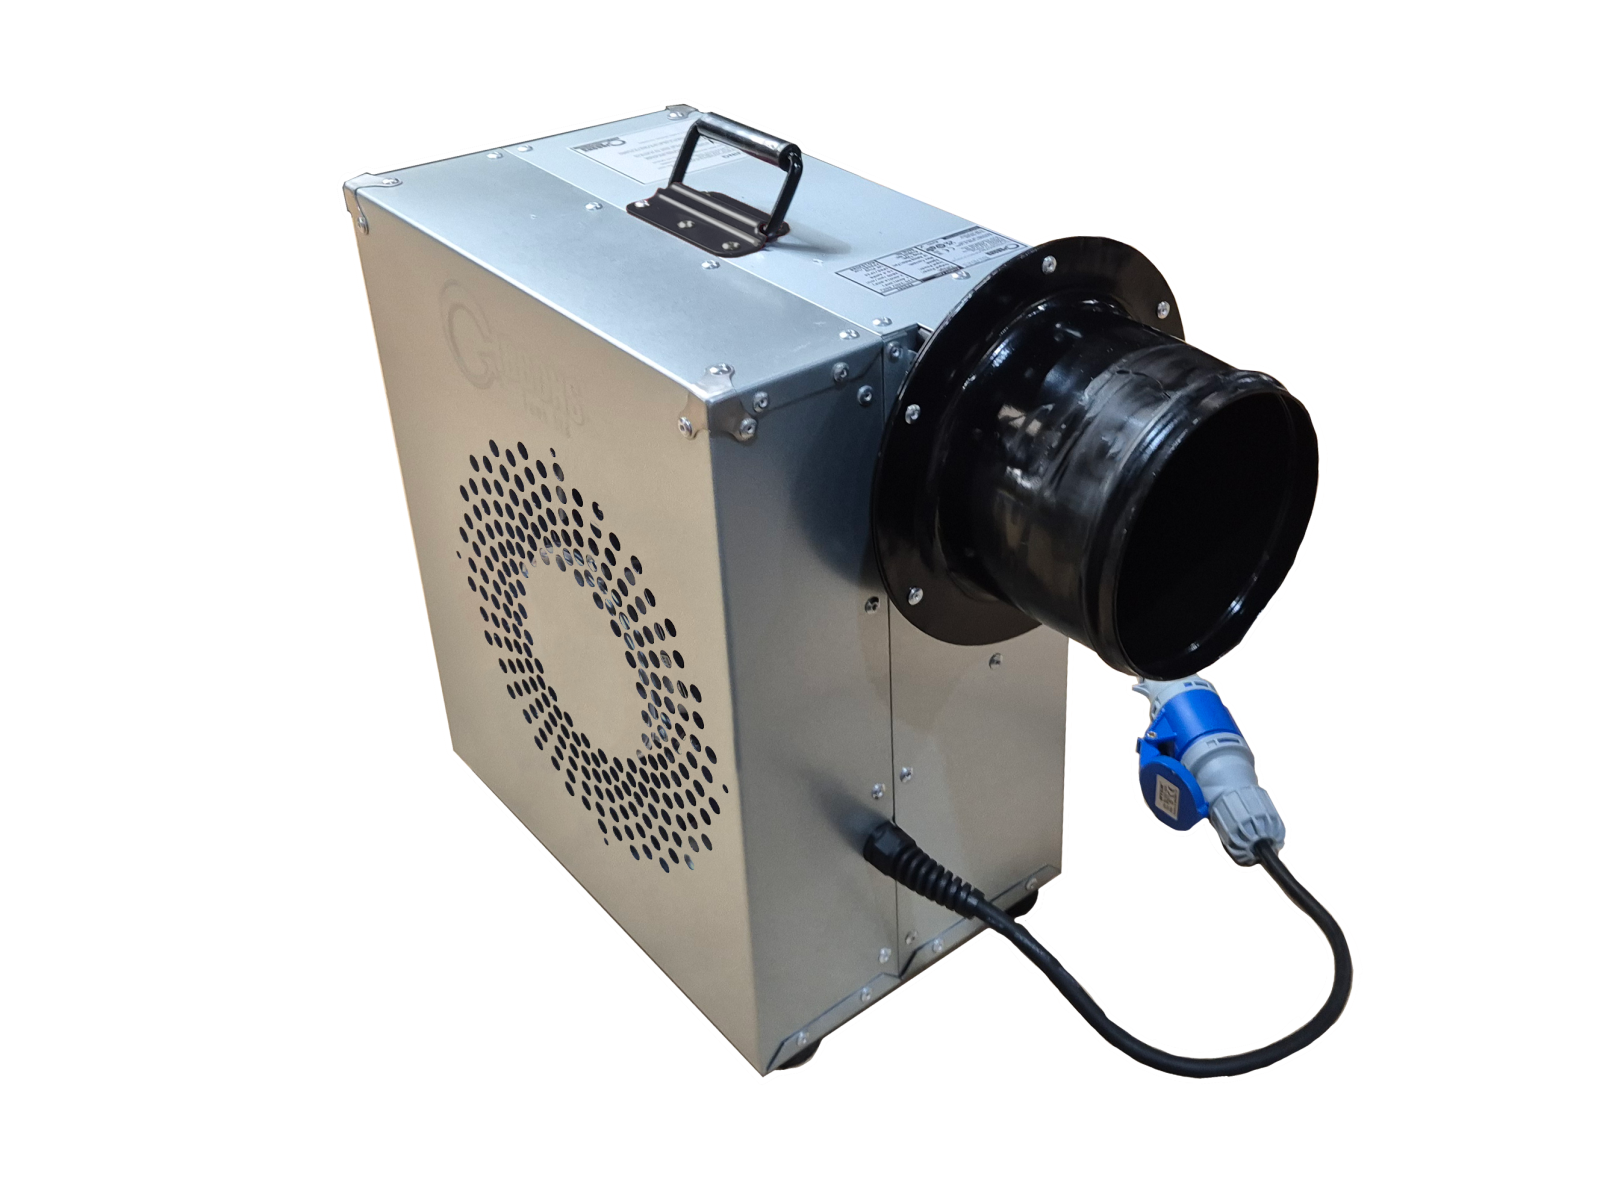 ACCS-11 1.5HP Pool Fan with 6 inch adapter